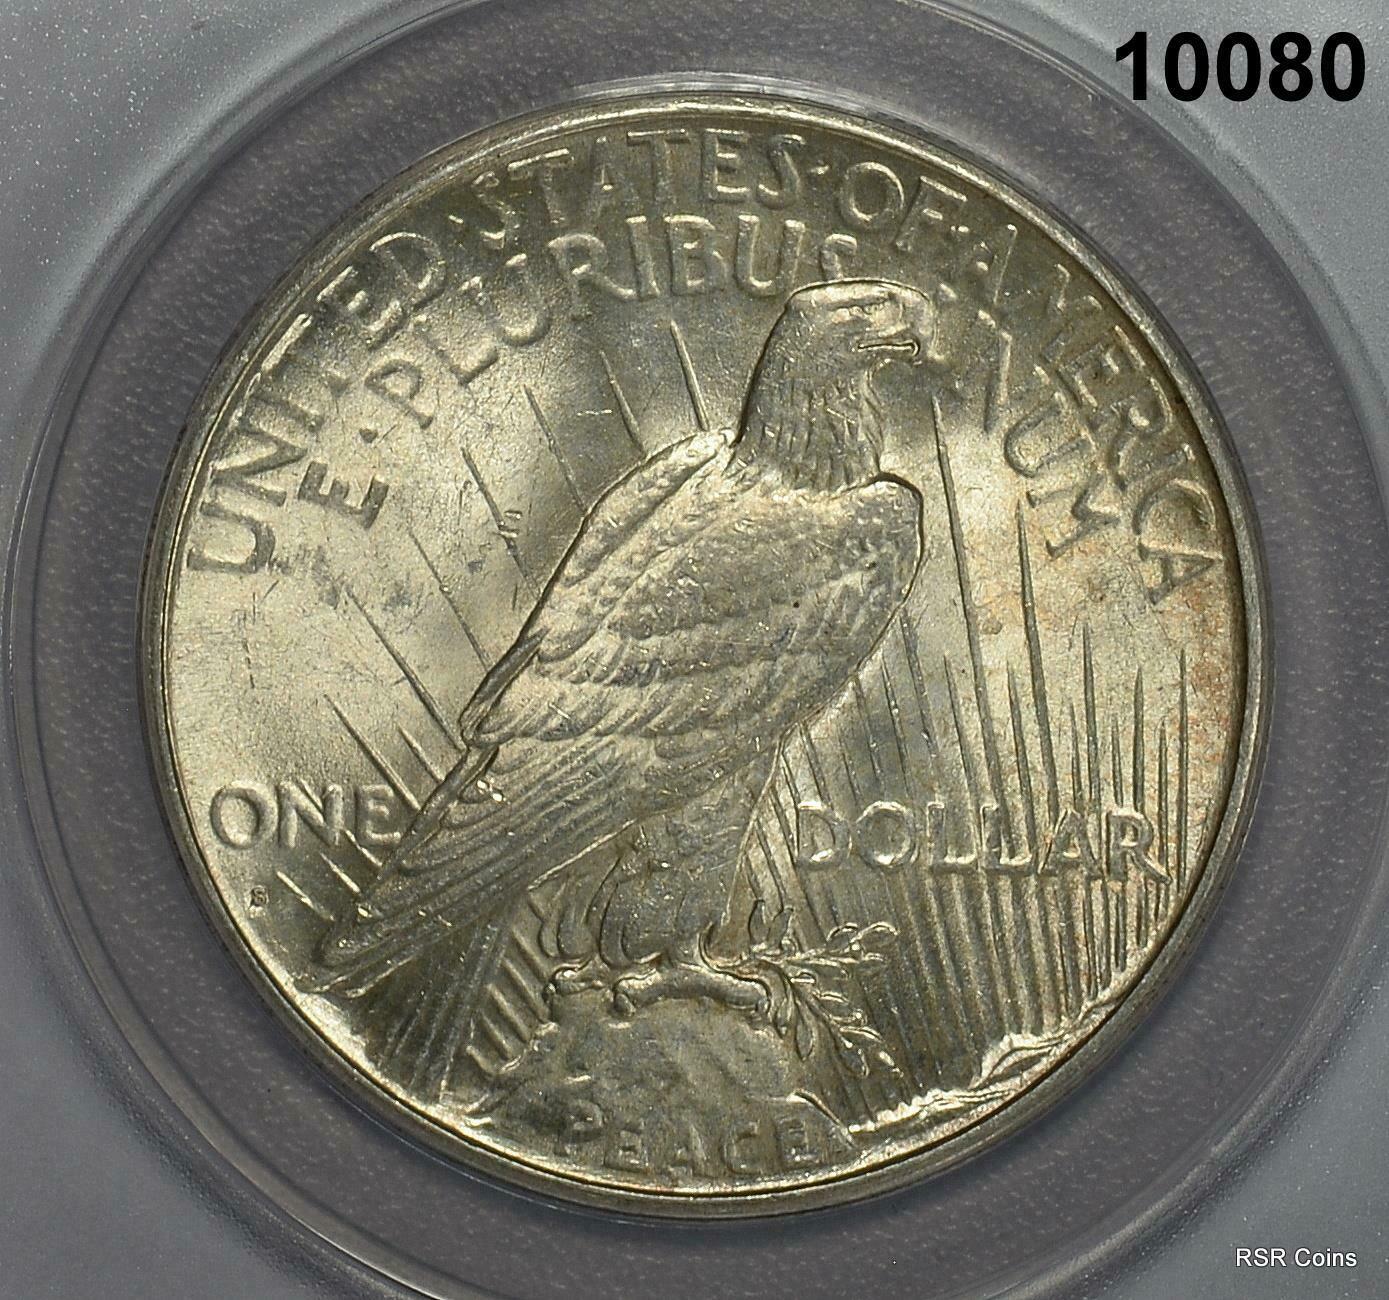 1926 S PEACE SILVER DOLLAR ANACS CERTIFIED AU55 BRIGHT! #10080